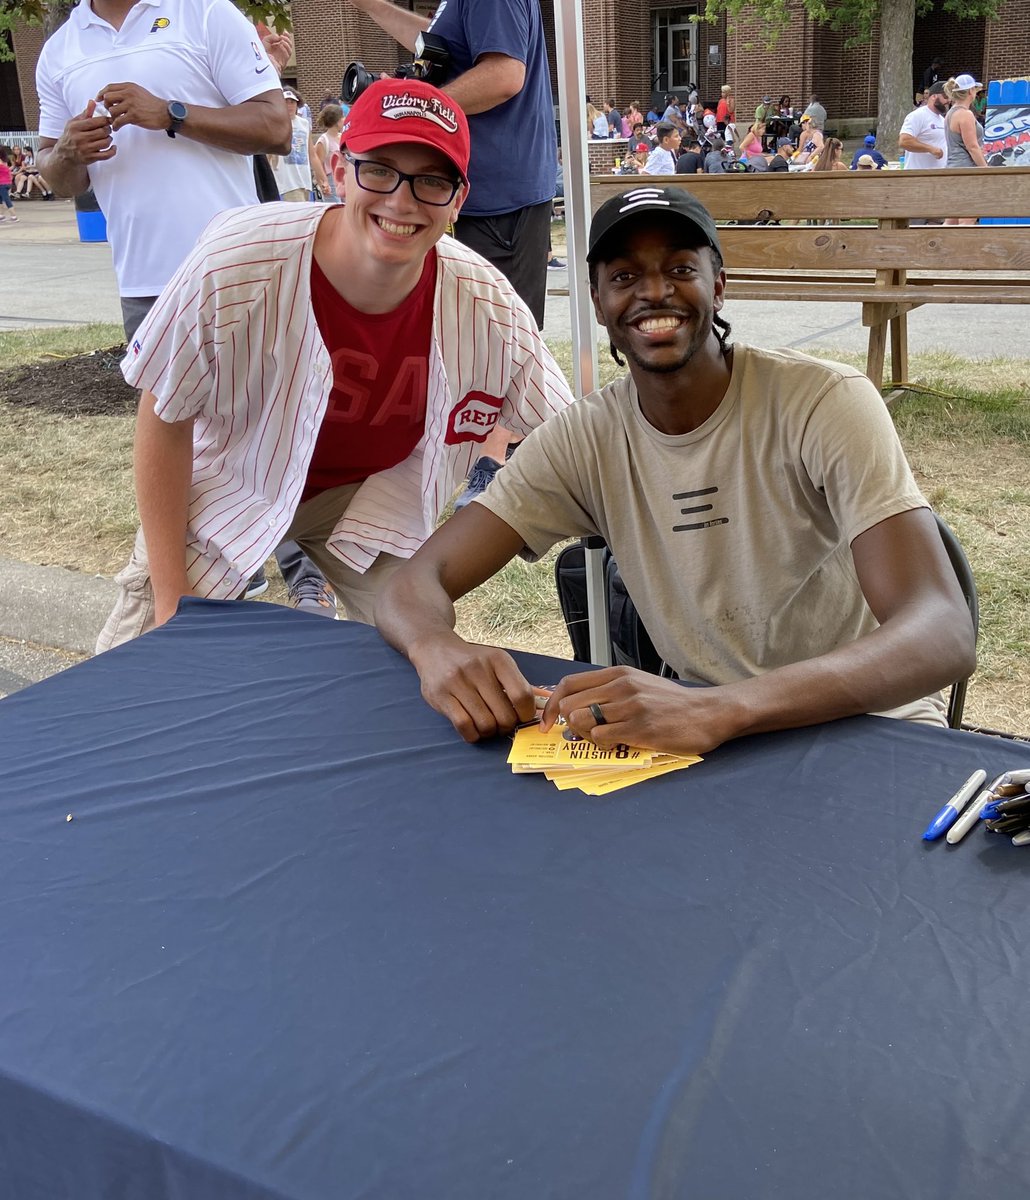 Got to meet @JustHolla7 at the State Fair!